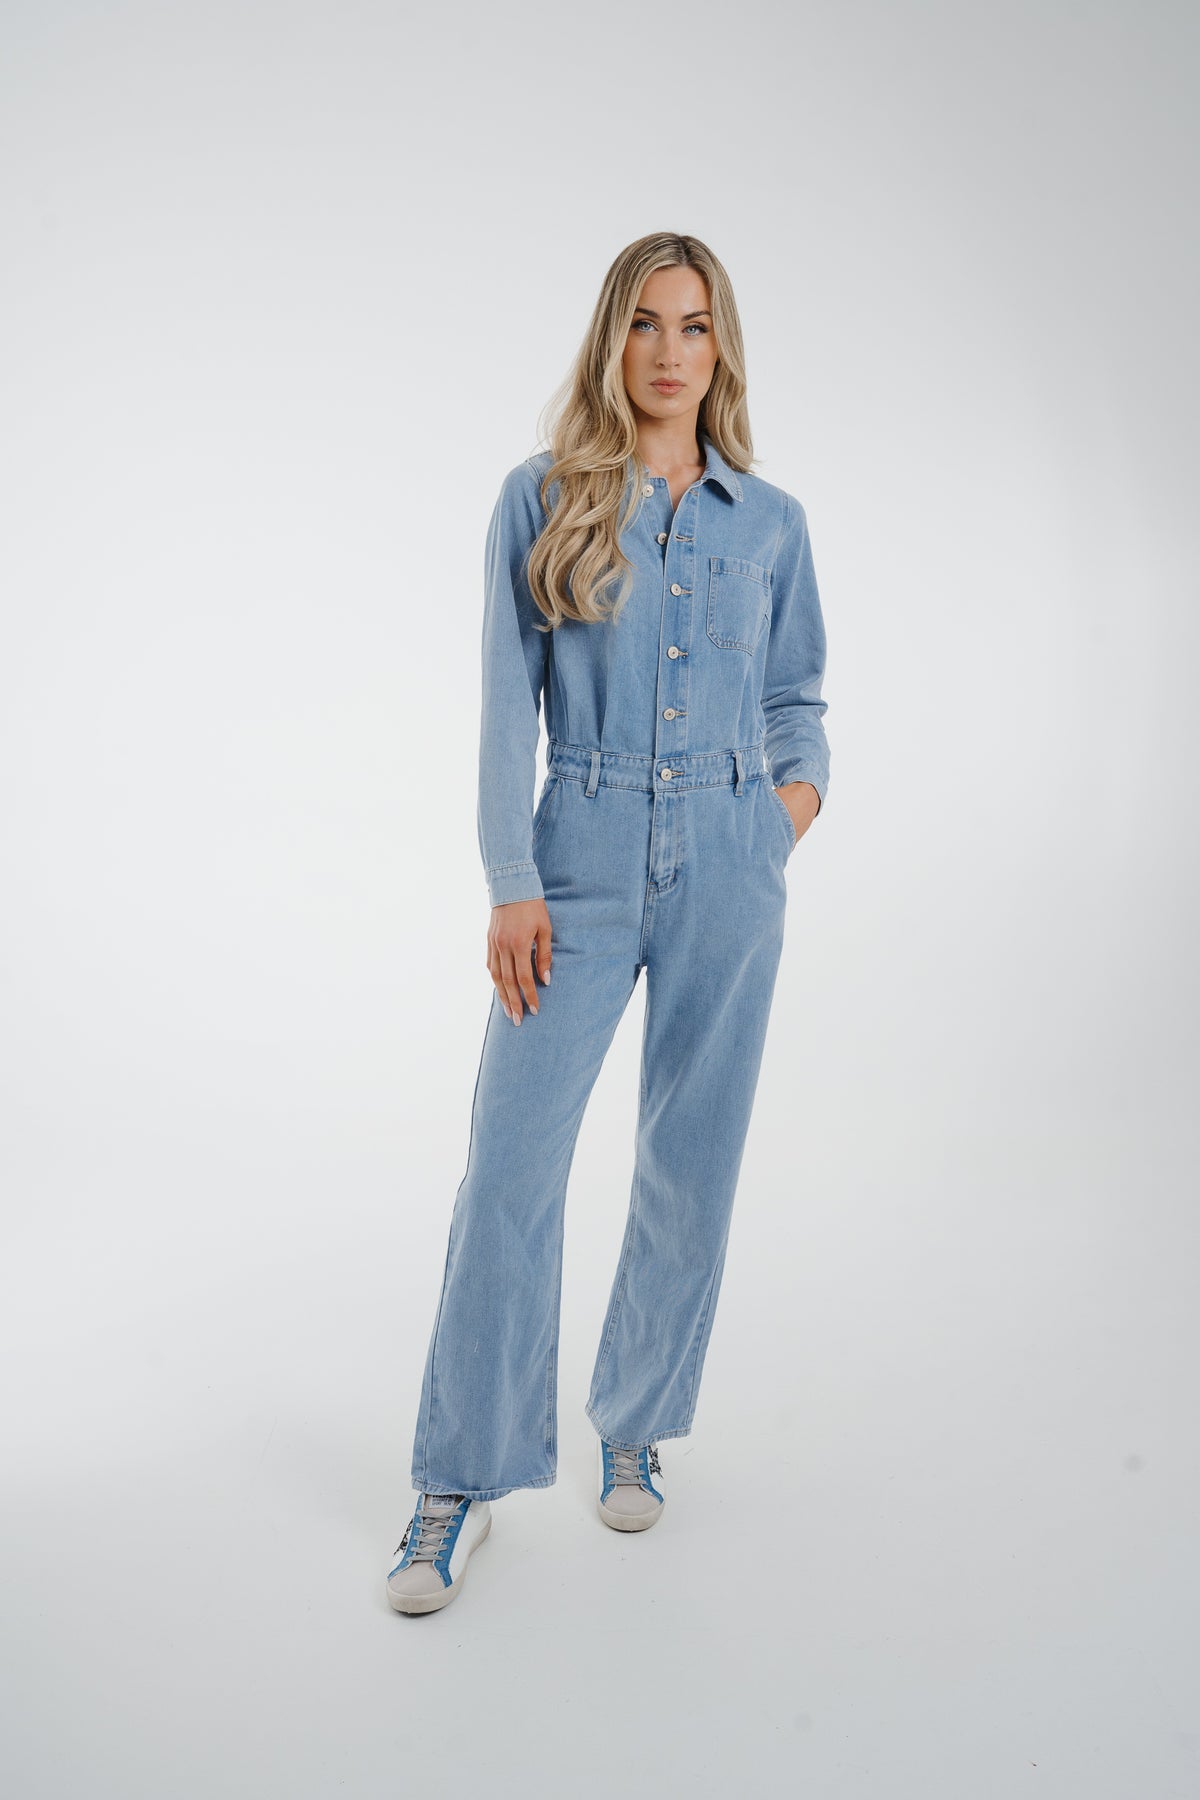 Women's Jumpsuits & Dungarees - Holly & Co